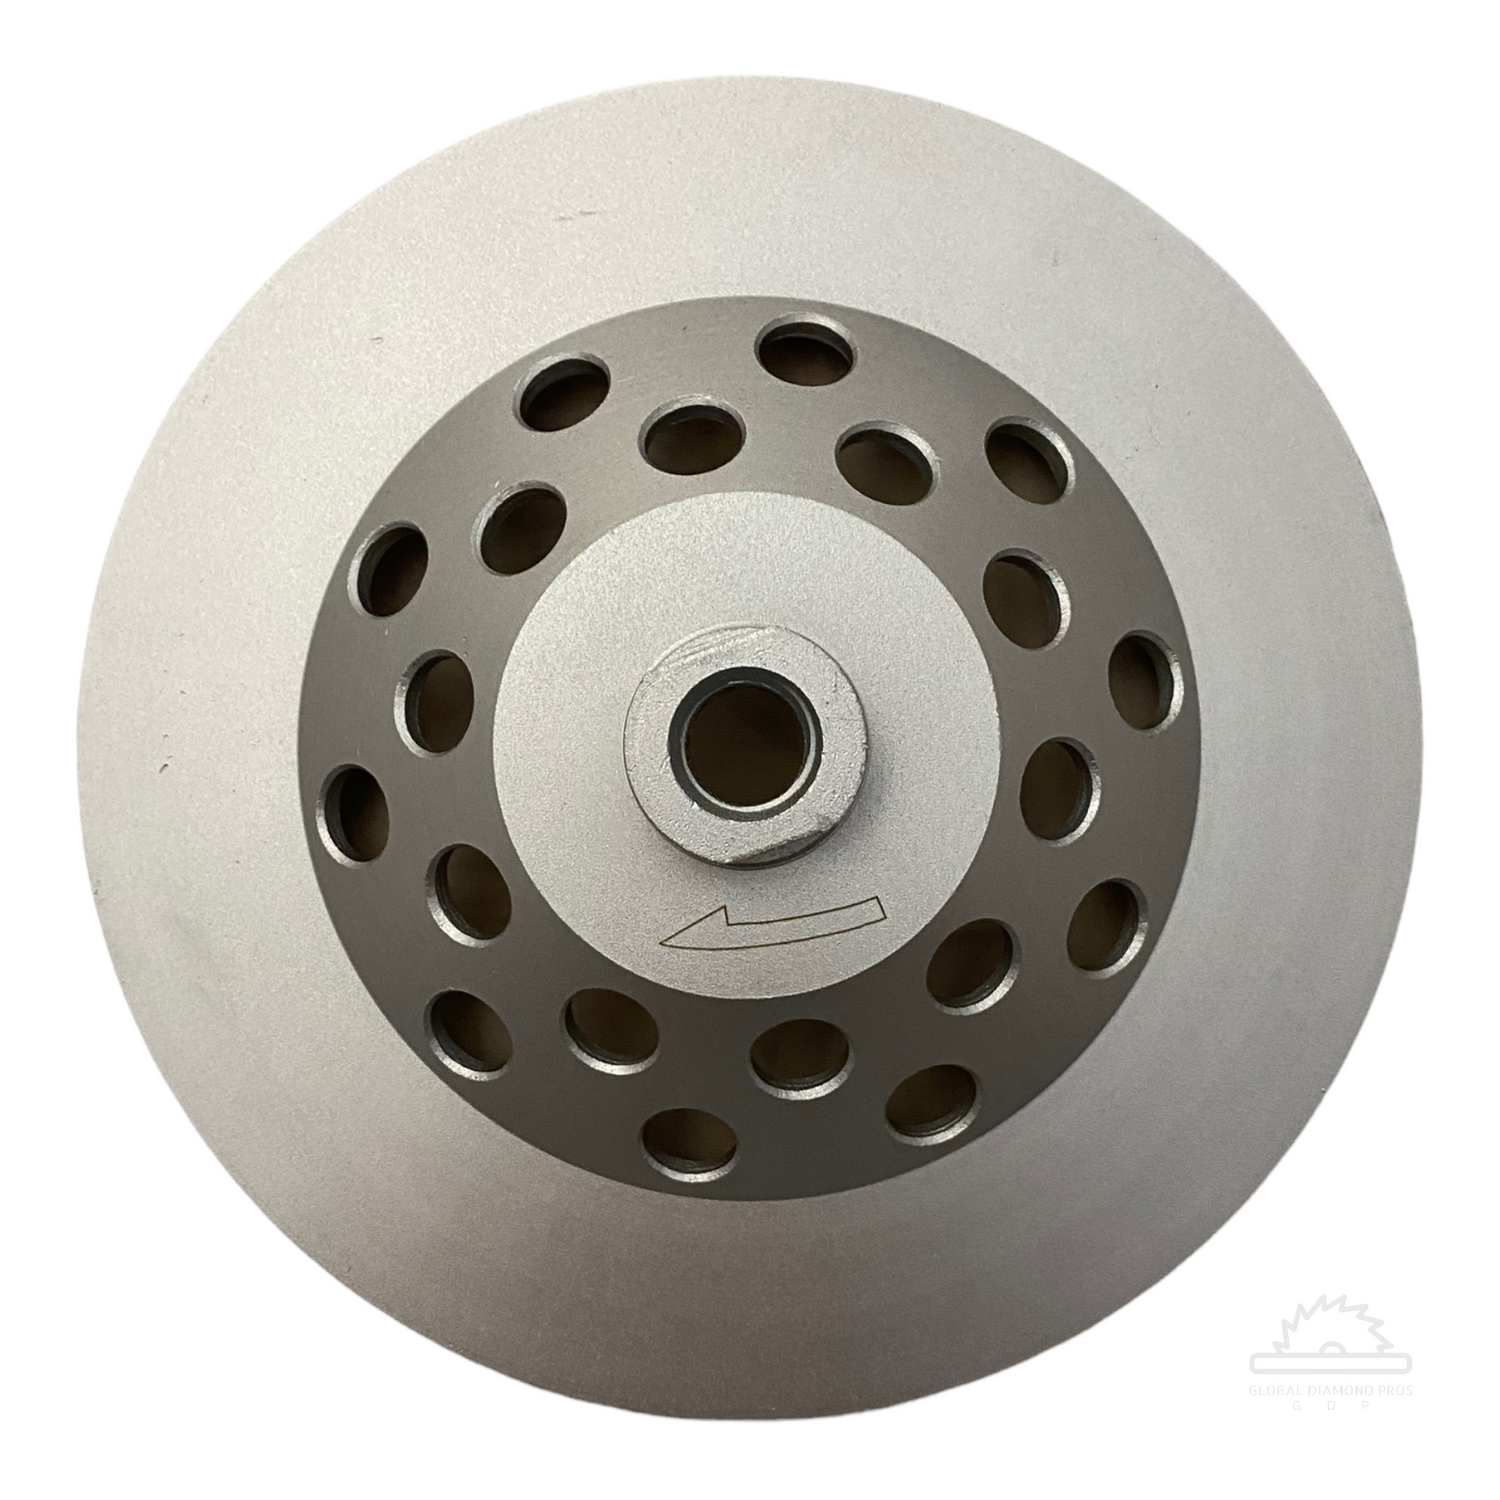 cup wheel for concrete 7 in. Diamond Turbo Cup Wheel